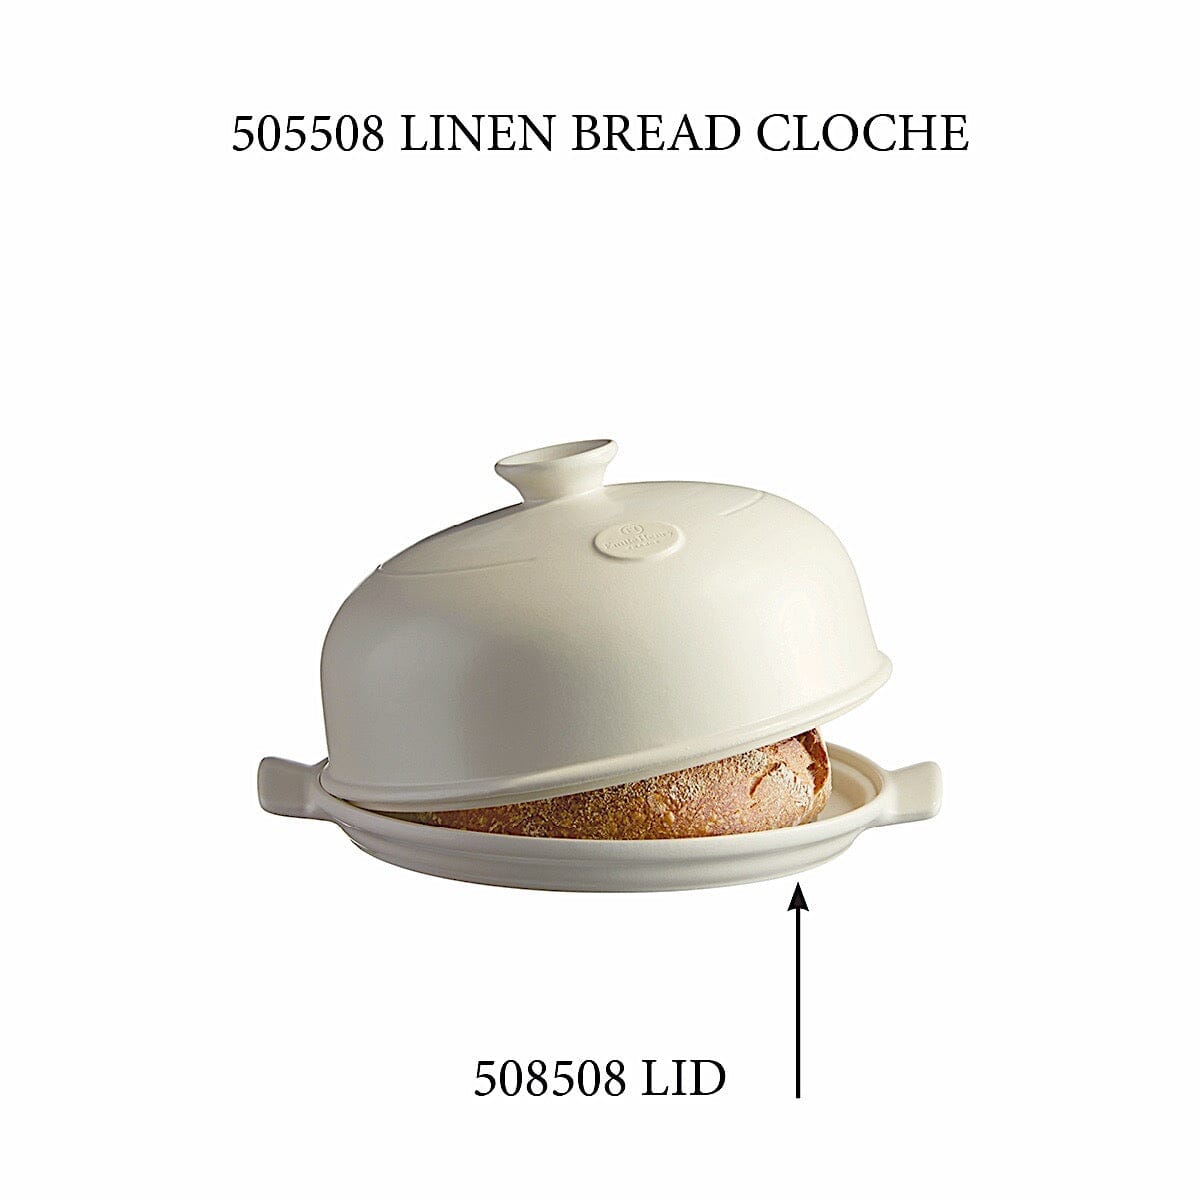 Burgundy Bread Cloche by Emile Henry - not available for shipping